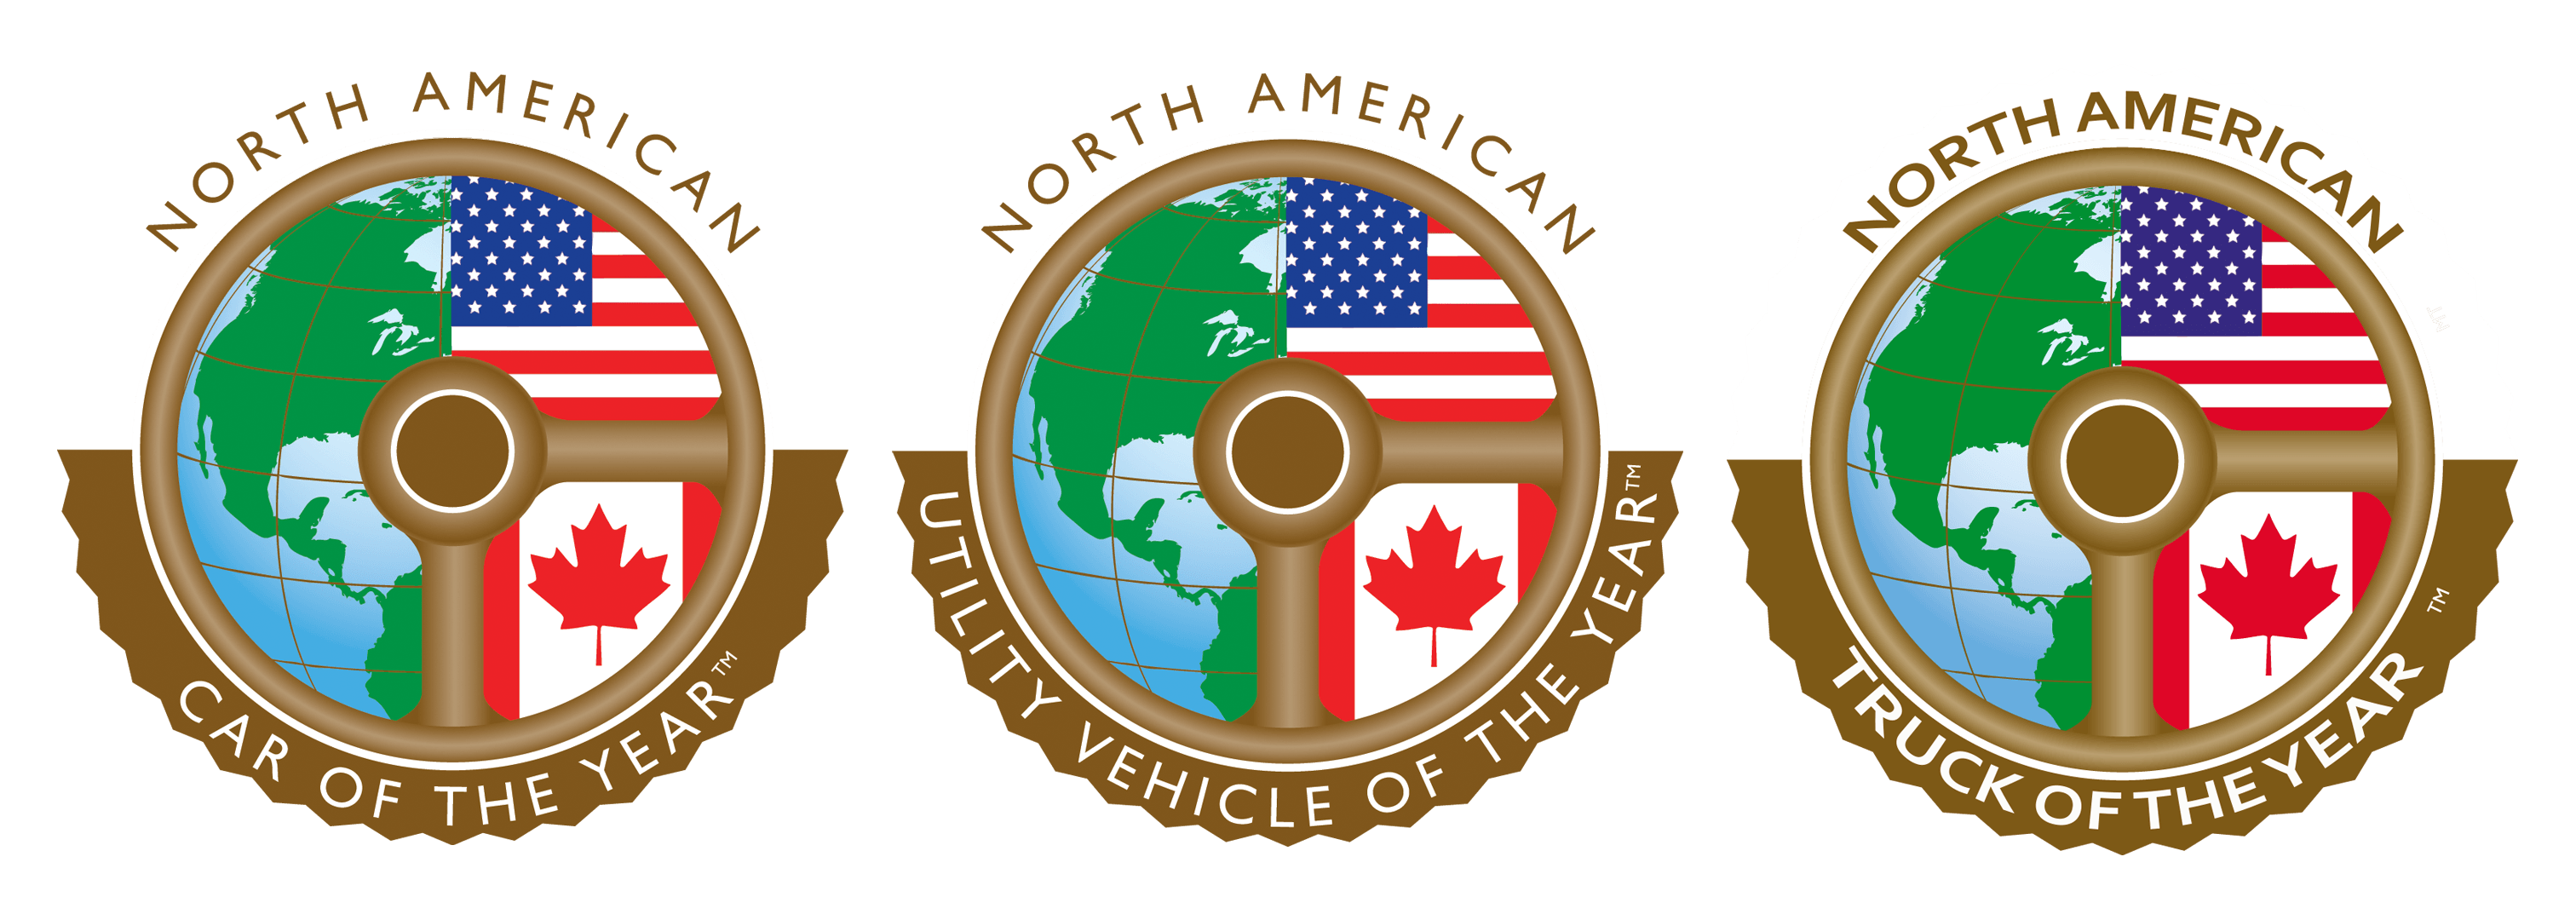 All American Car Logo - 2018 North American Car Utility and Truck of the Year Winners Announced